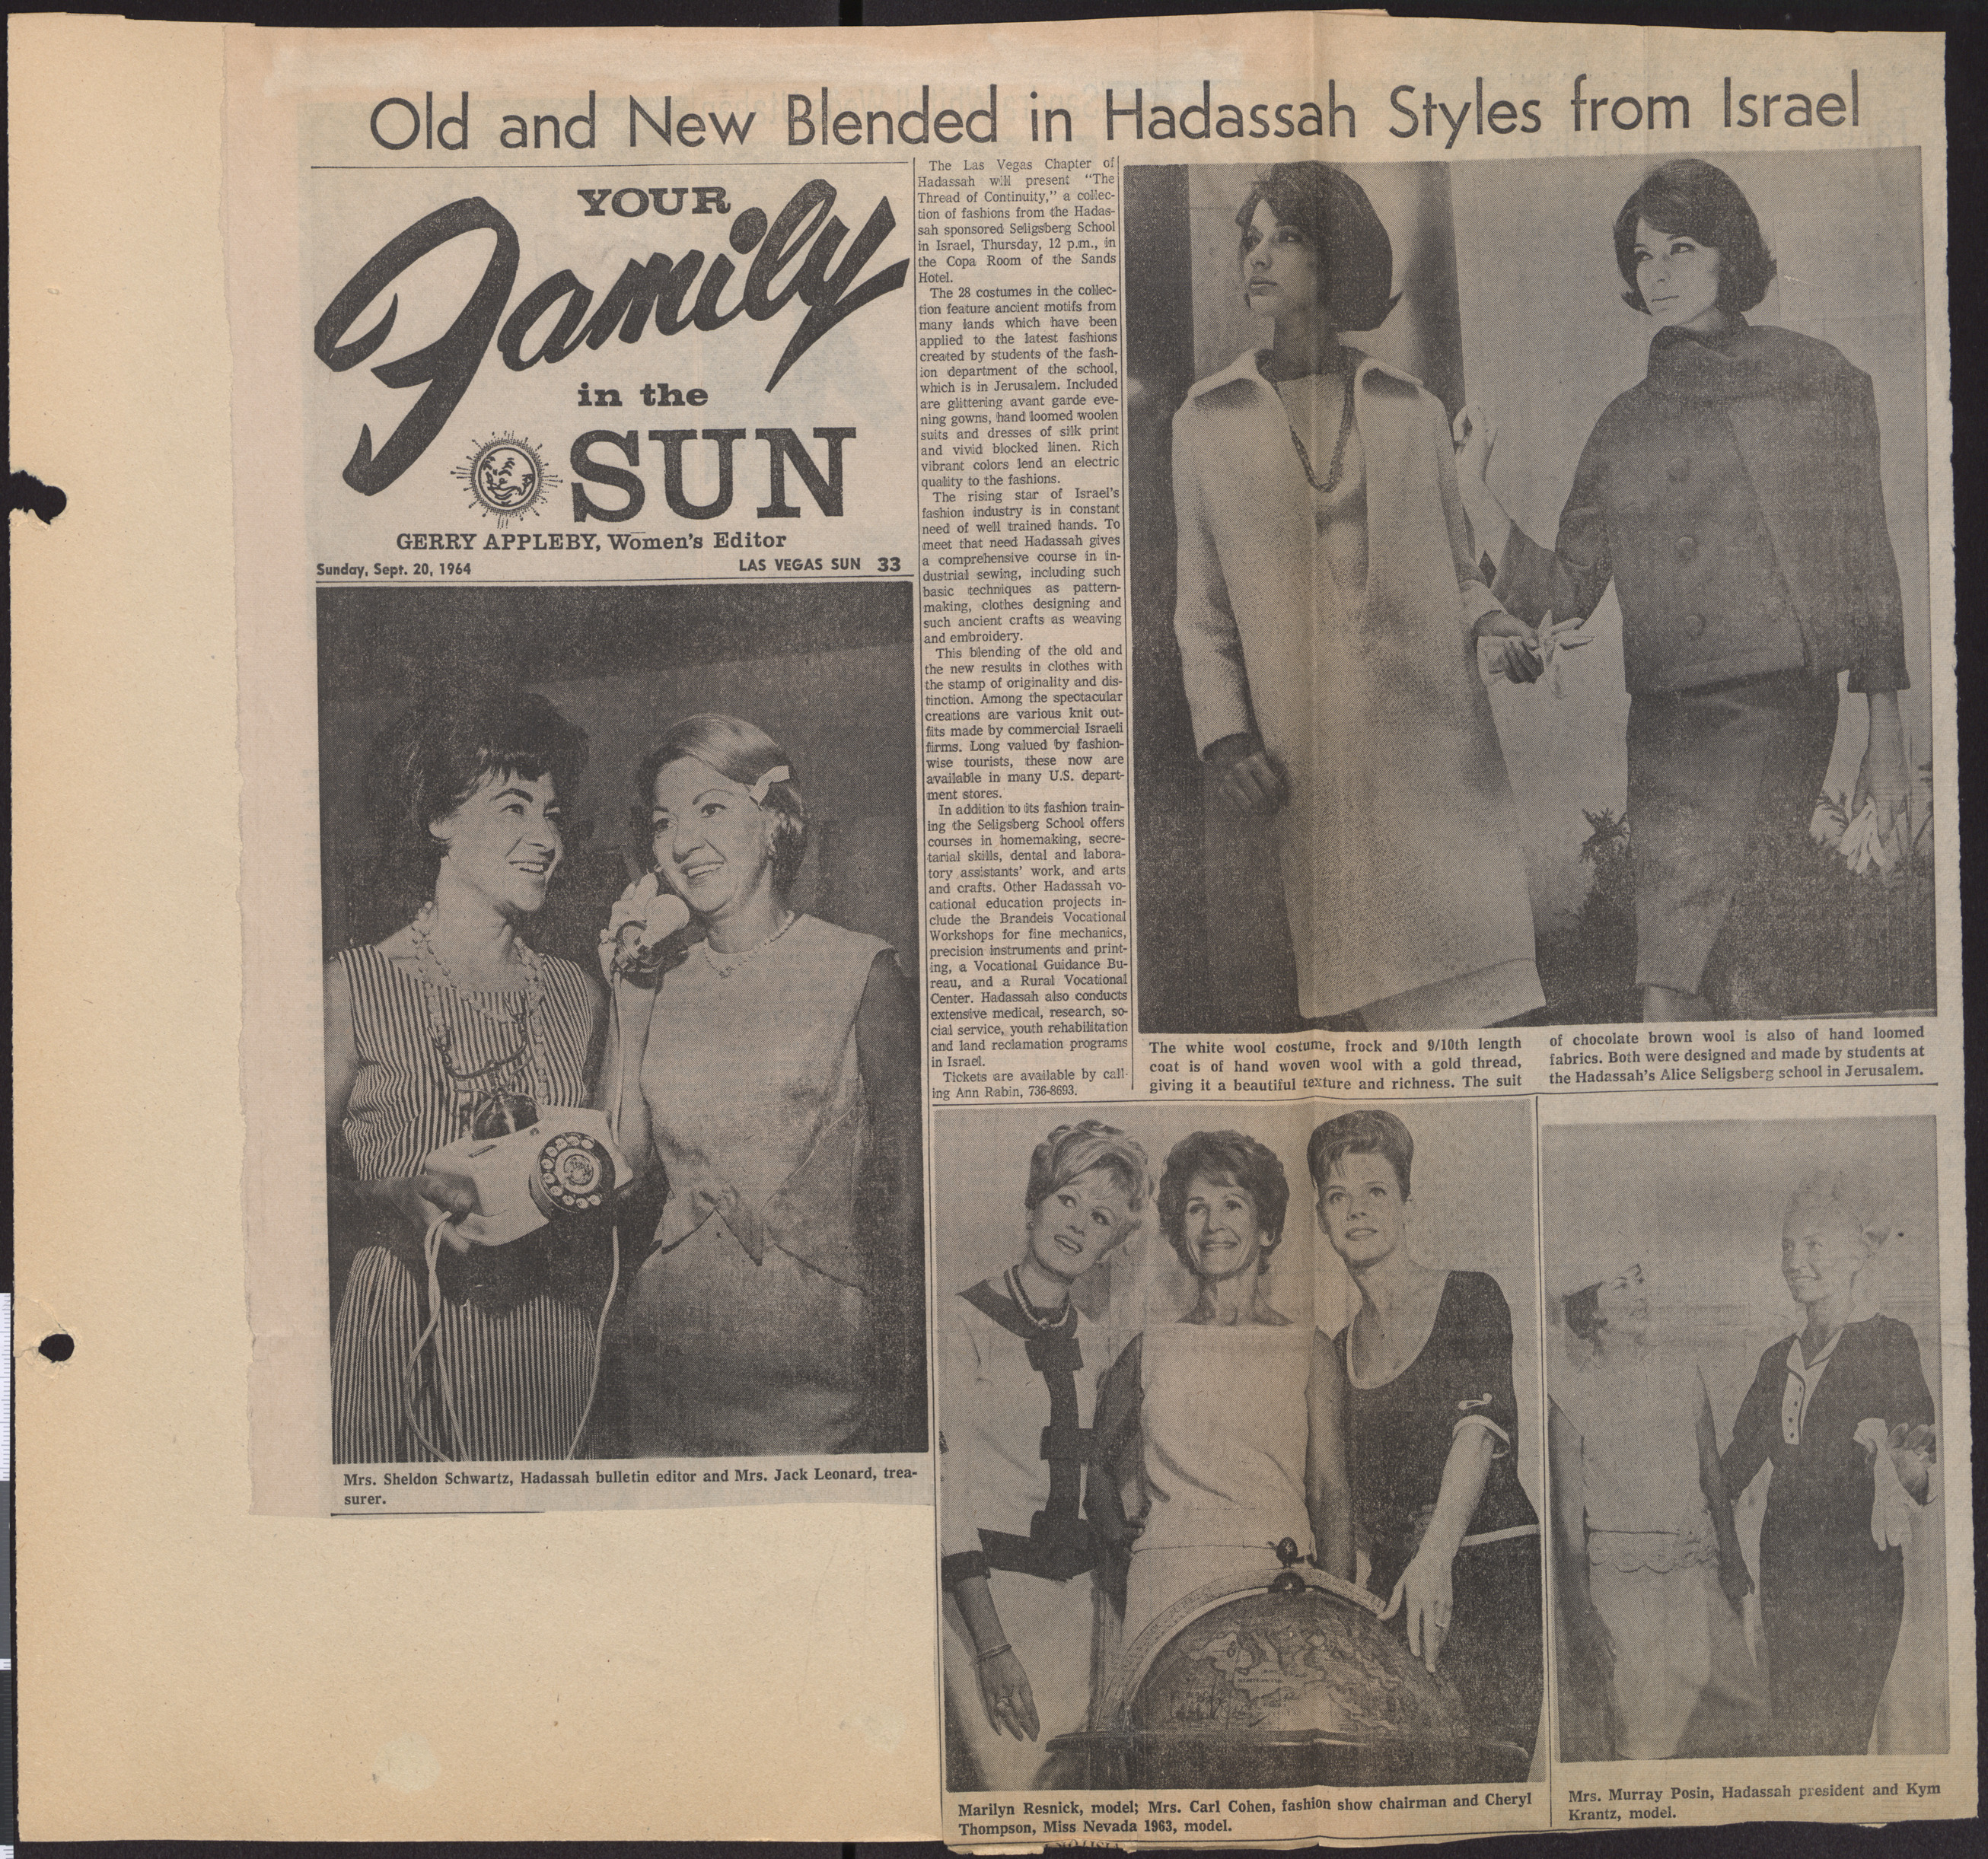 Newspaper clipping, Old and New Blended in Hadassah Styles from Israel, Las Vegas Sun, September 20, 1964